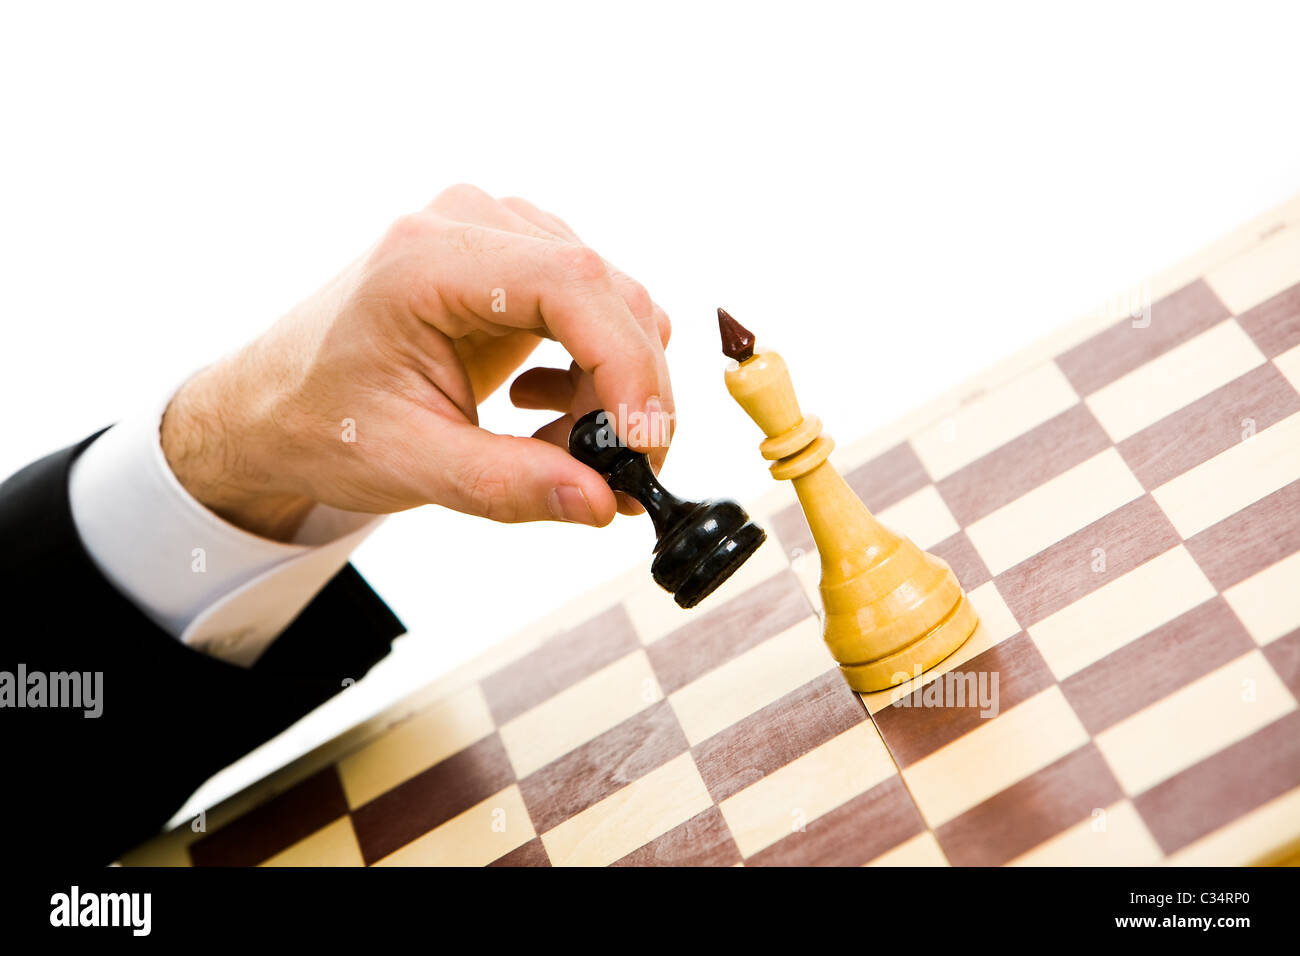 13,700+ Next Move Chess Stock Photos, Pictures & Royalty-Free